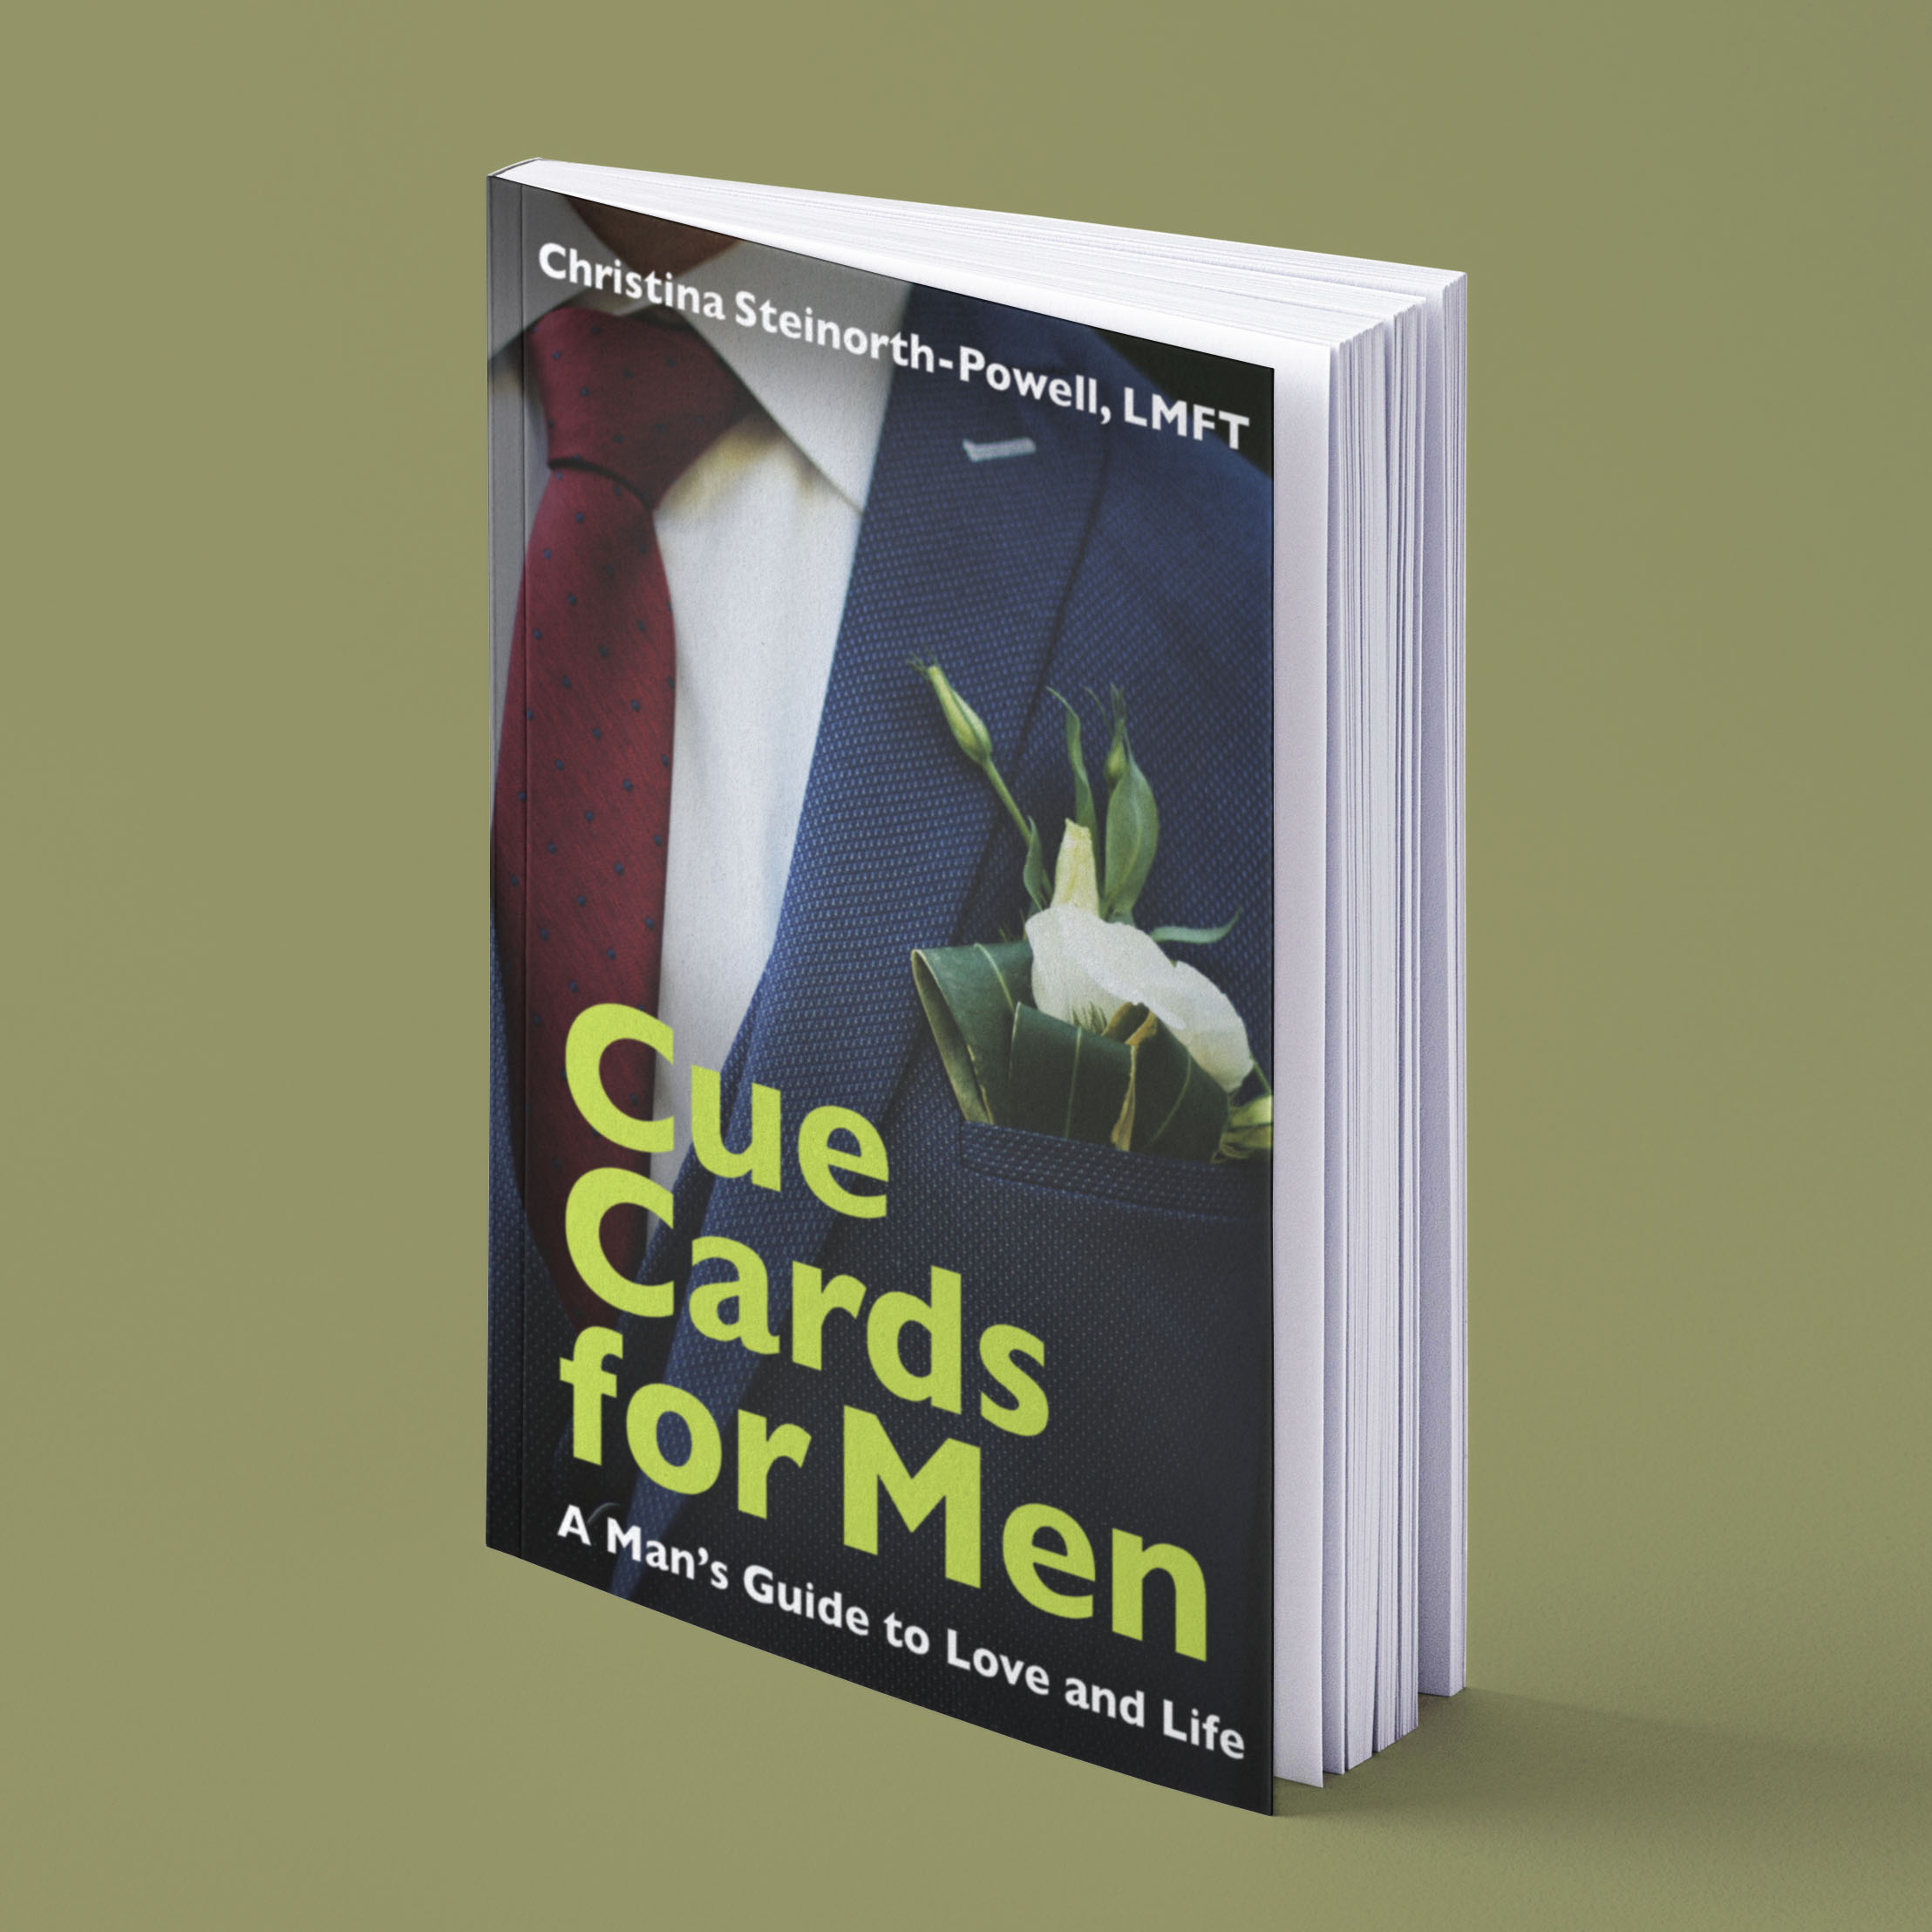 Cue Cards for Men: A Man's Guide to Love and Life by Christina Steinorth-Powell